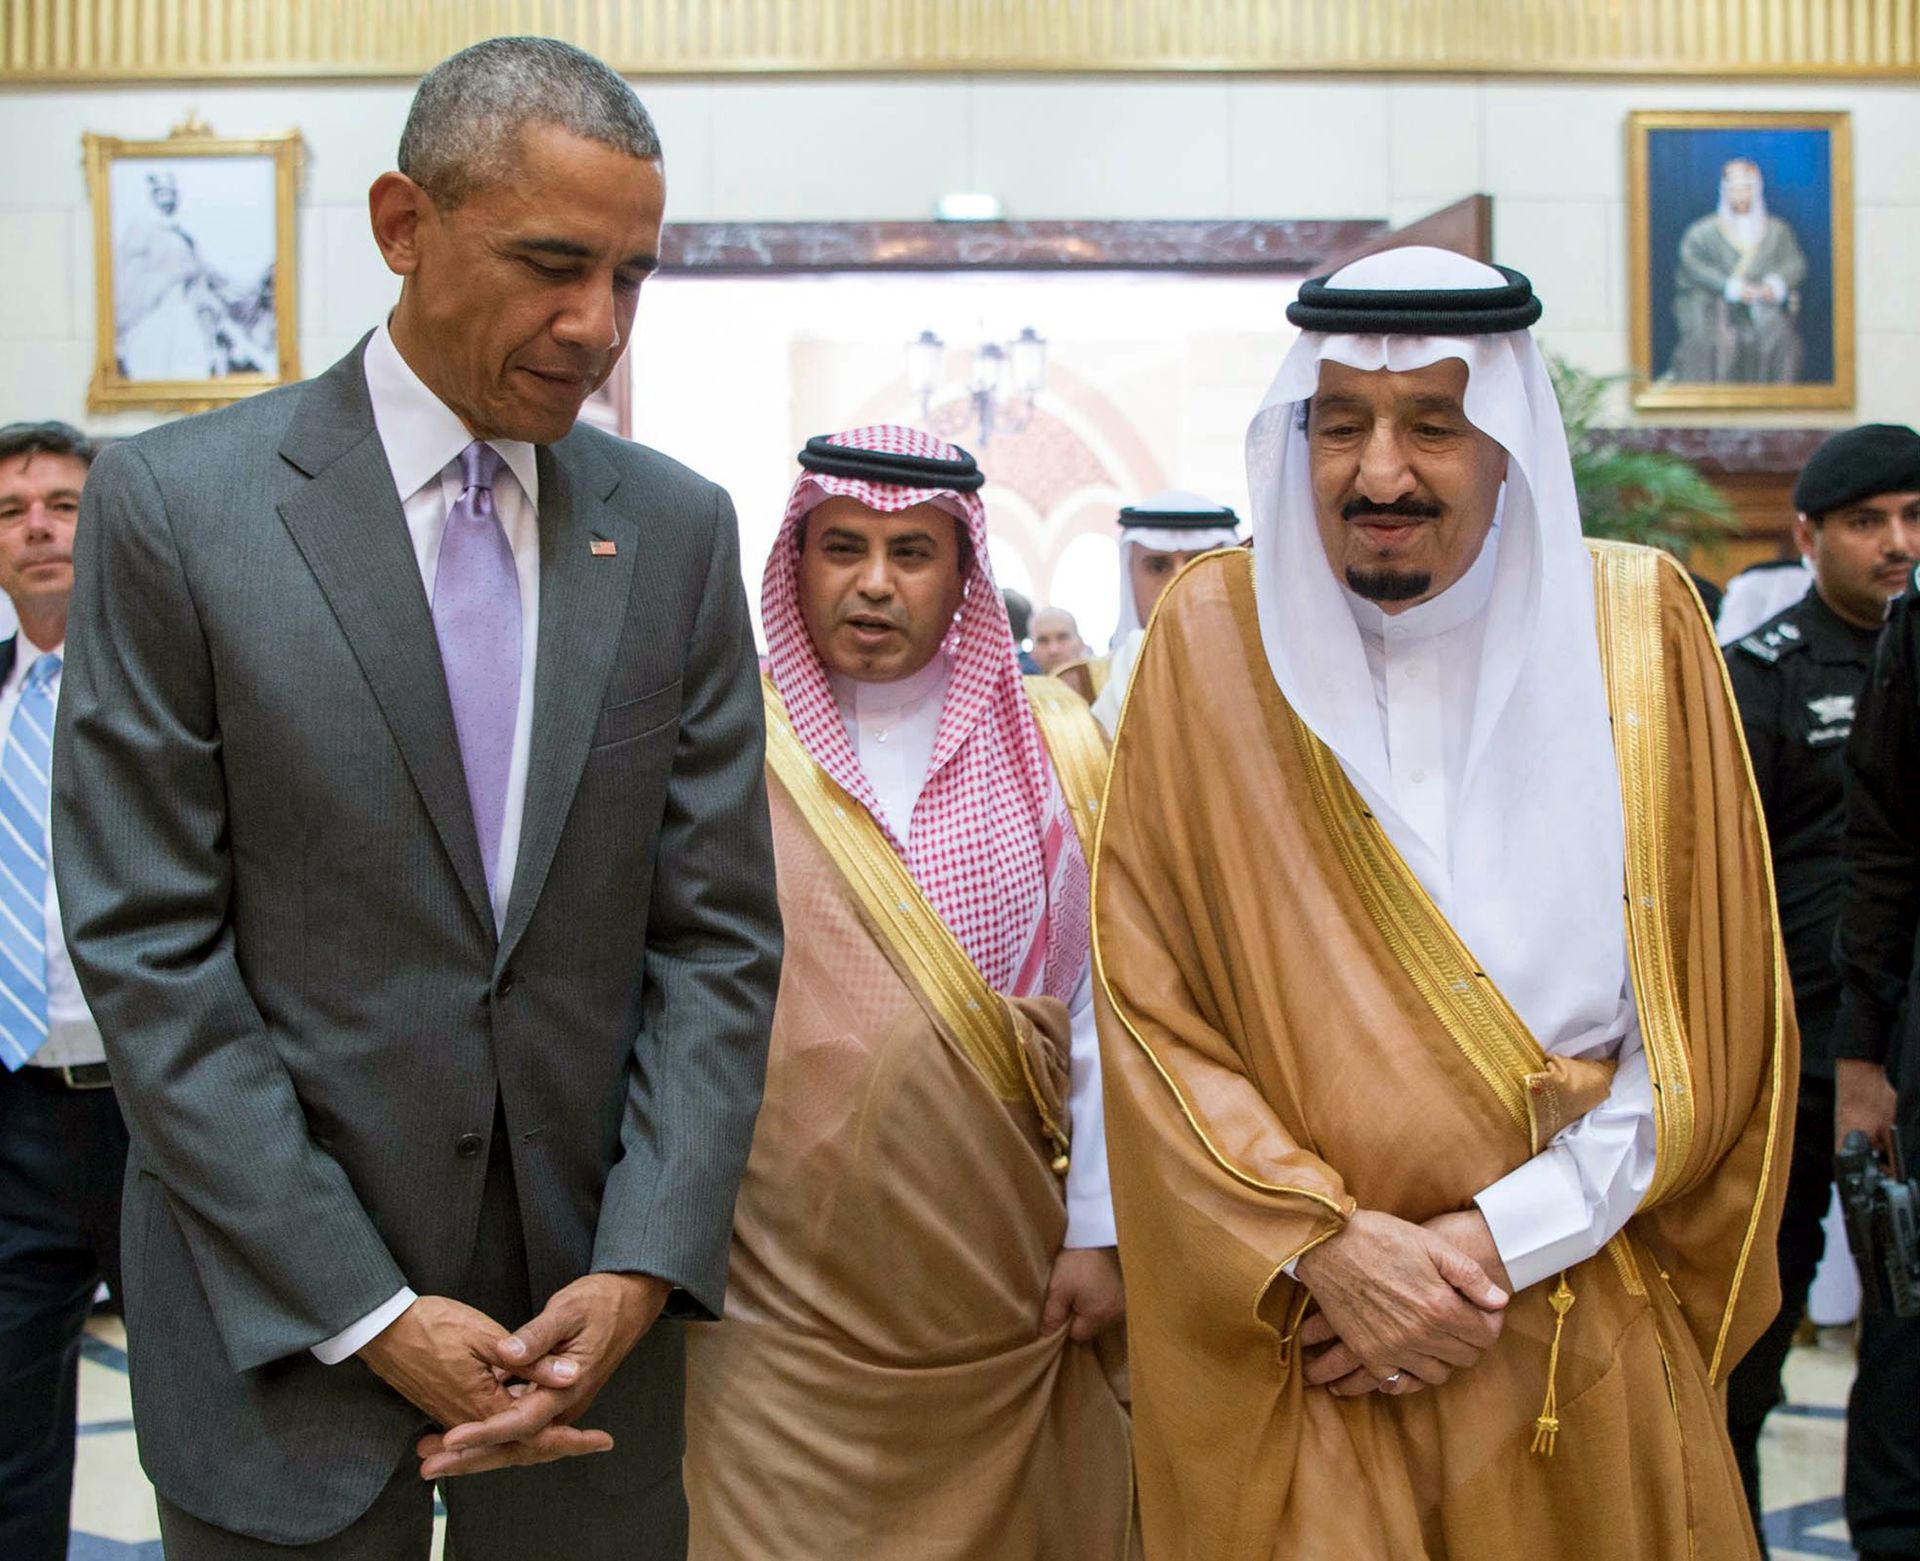 epa05268861 A handout photograph released by the official Saudi Press Agency (SPA) shows Saudi King Salman bin Abdulaziz Al Saud (R) meeting with US President Barack Obama (L) in Riyadh, Saudi Arabia, 20 April 2016. Obama arrived in Saudi Arabia to meet with King Salman bin Abdulaziz Al Saud and participate on 21 April in the Gulf Cooperation Council (GCC) summit.   HANDOUT EDITORIAL USE ONLY/NO SALES